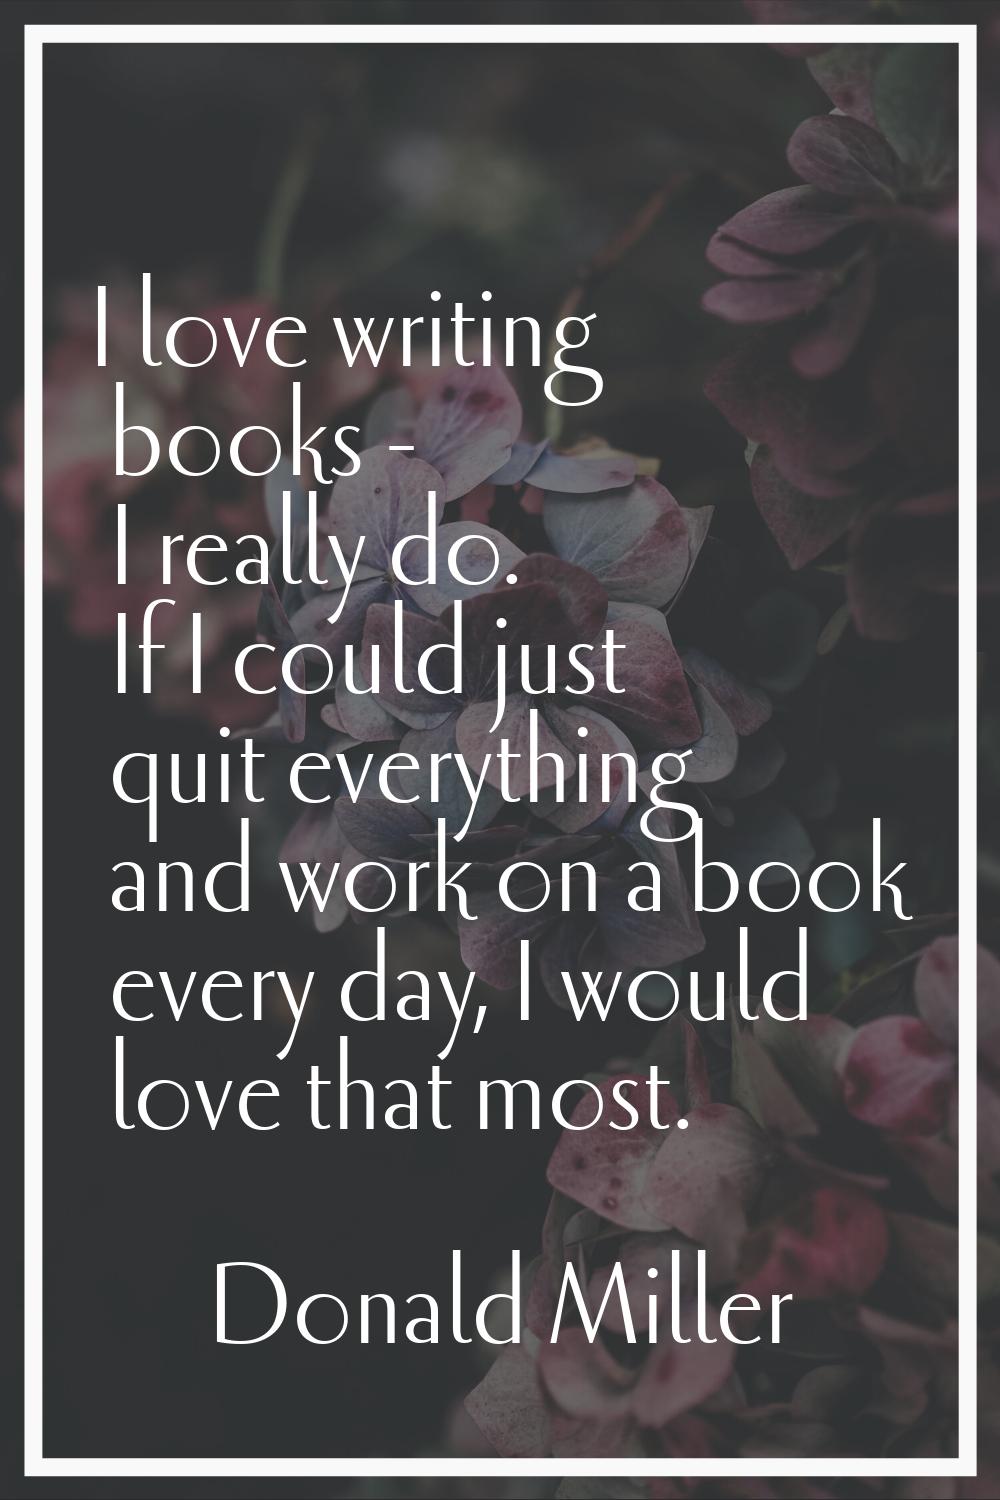 I love writing books - I really do. If I could just quit everything and work on a book every day, I